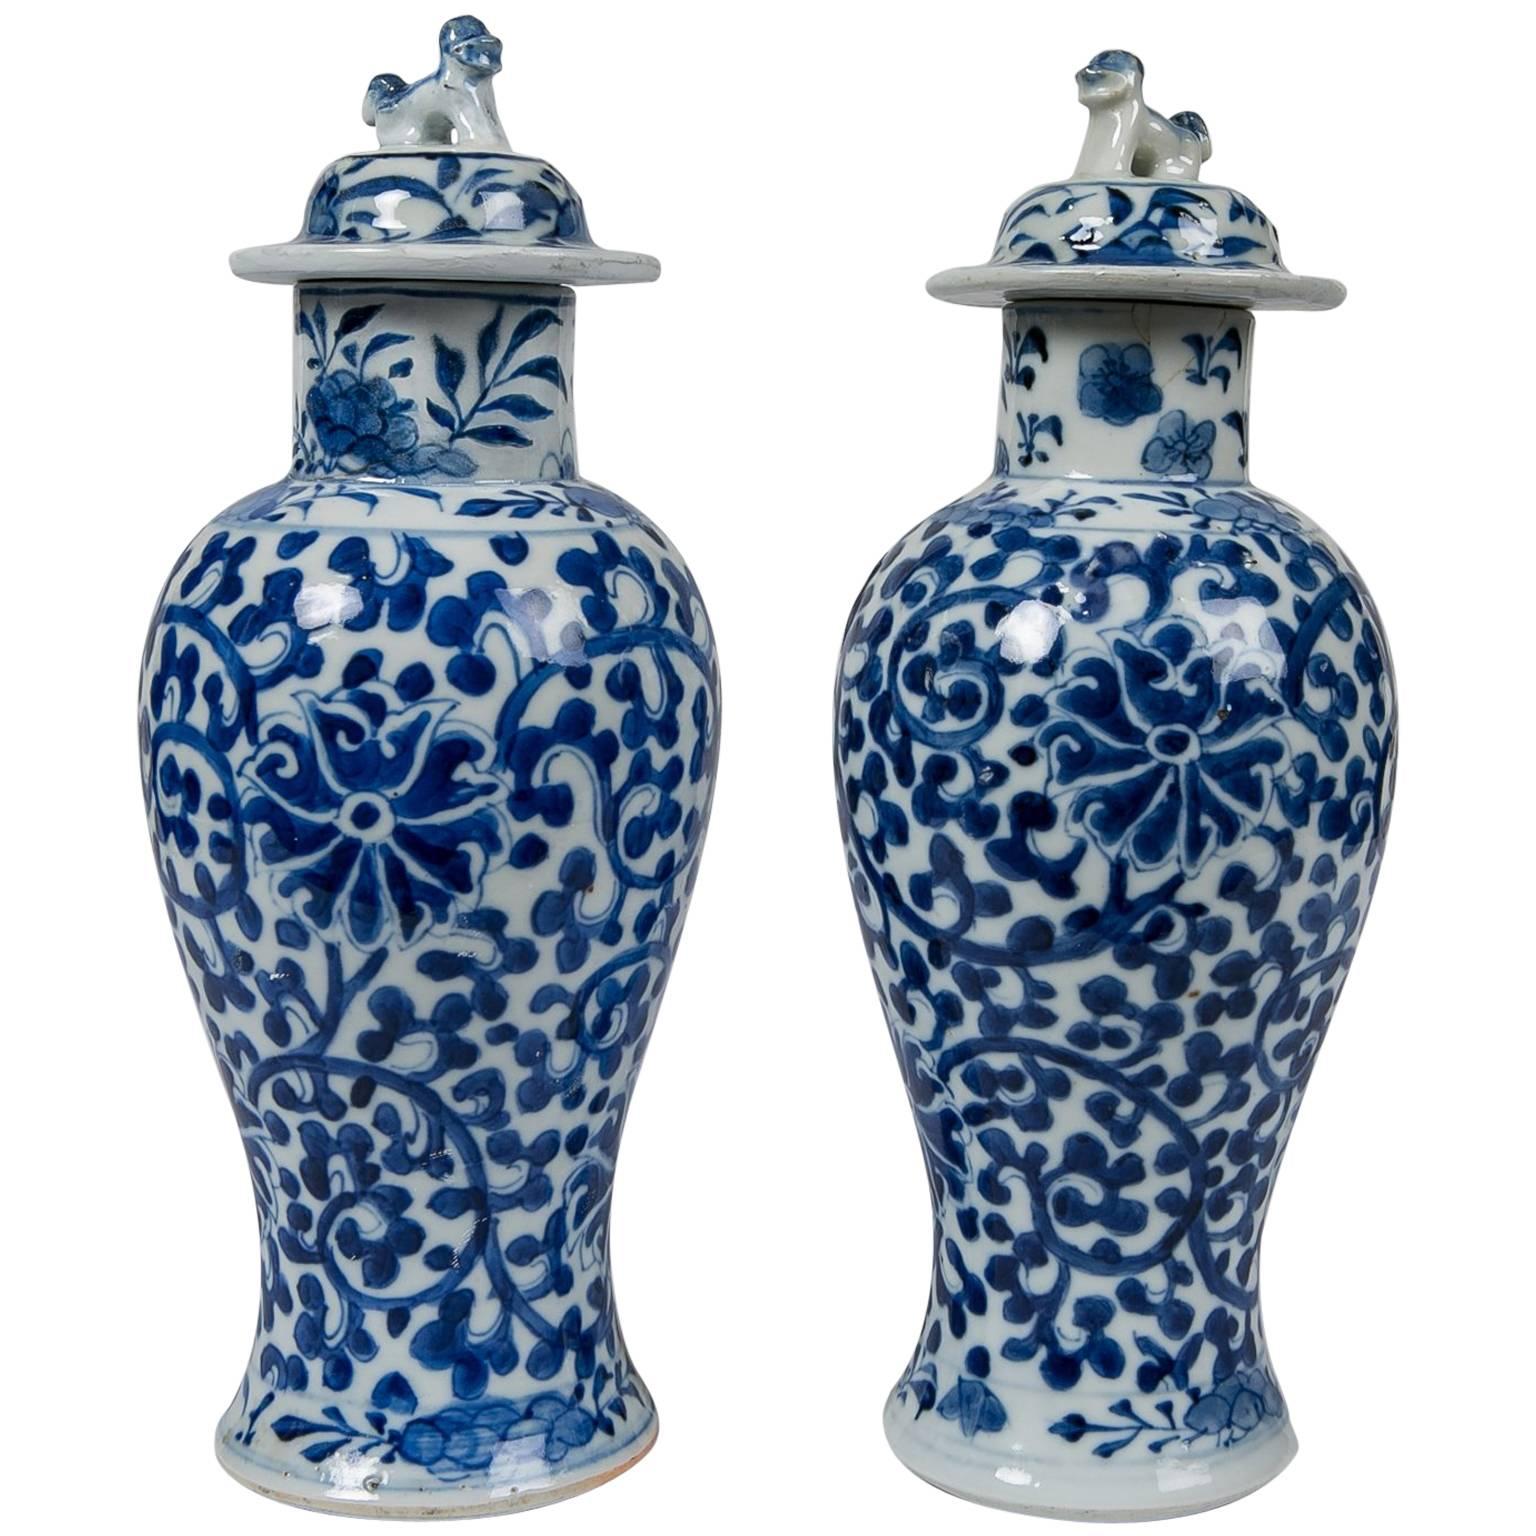 Blue and White Chinese Porcelain Vases, Pair